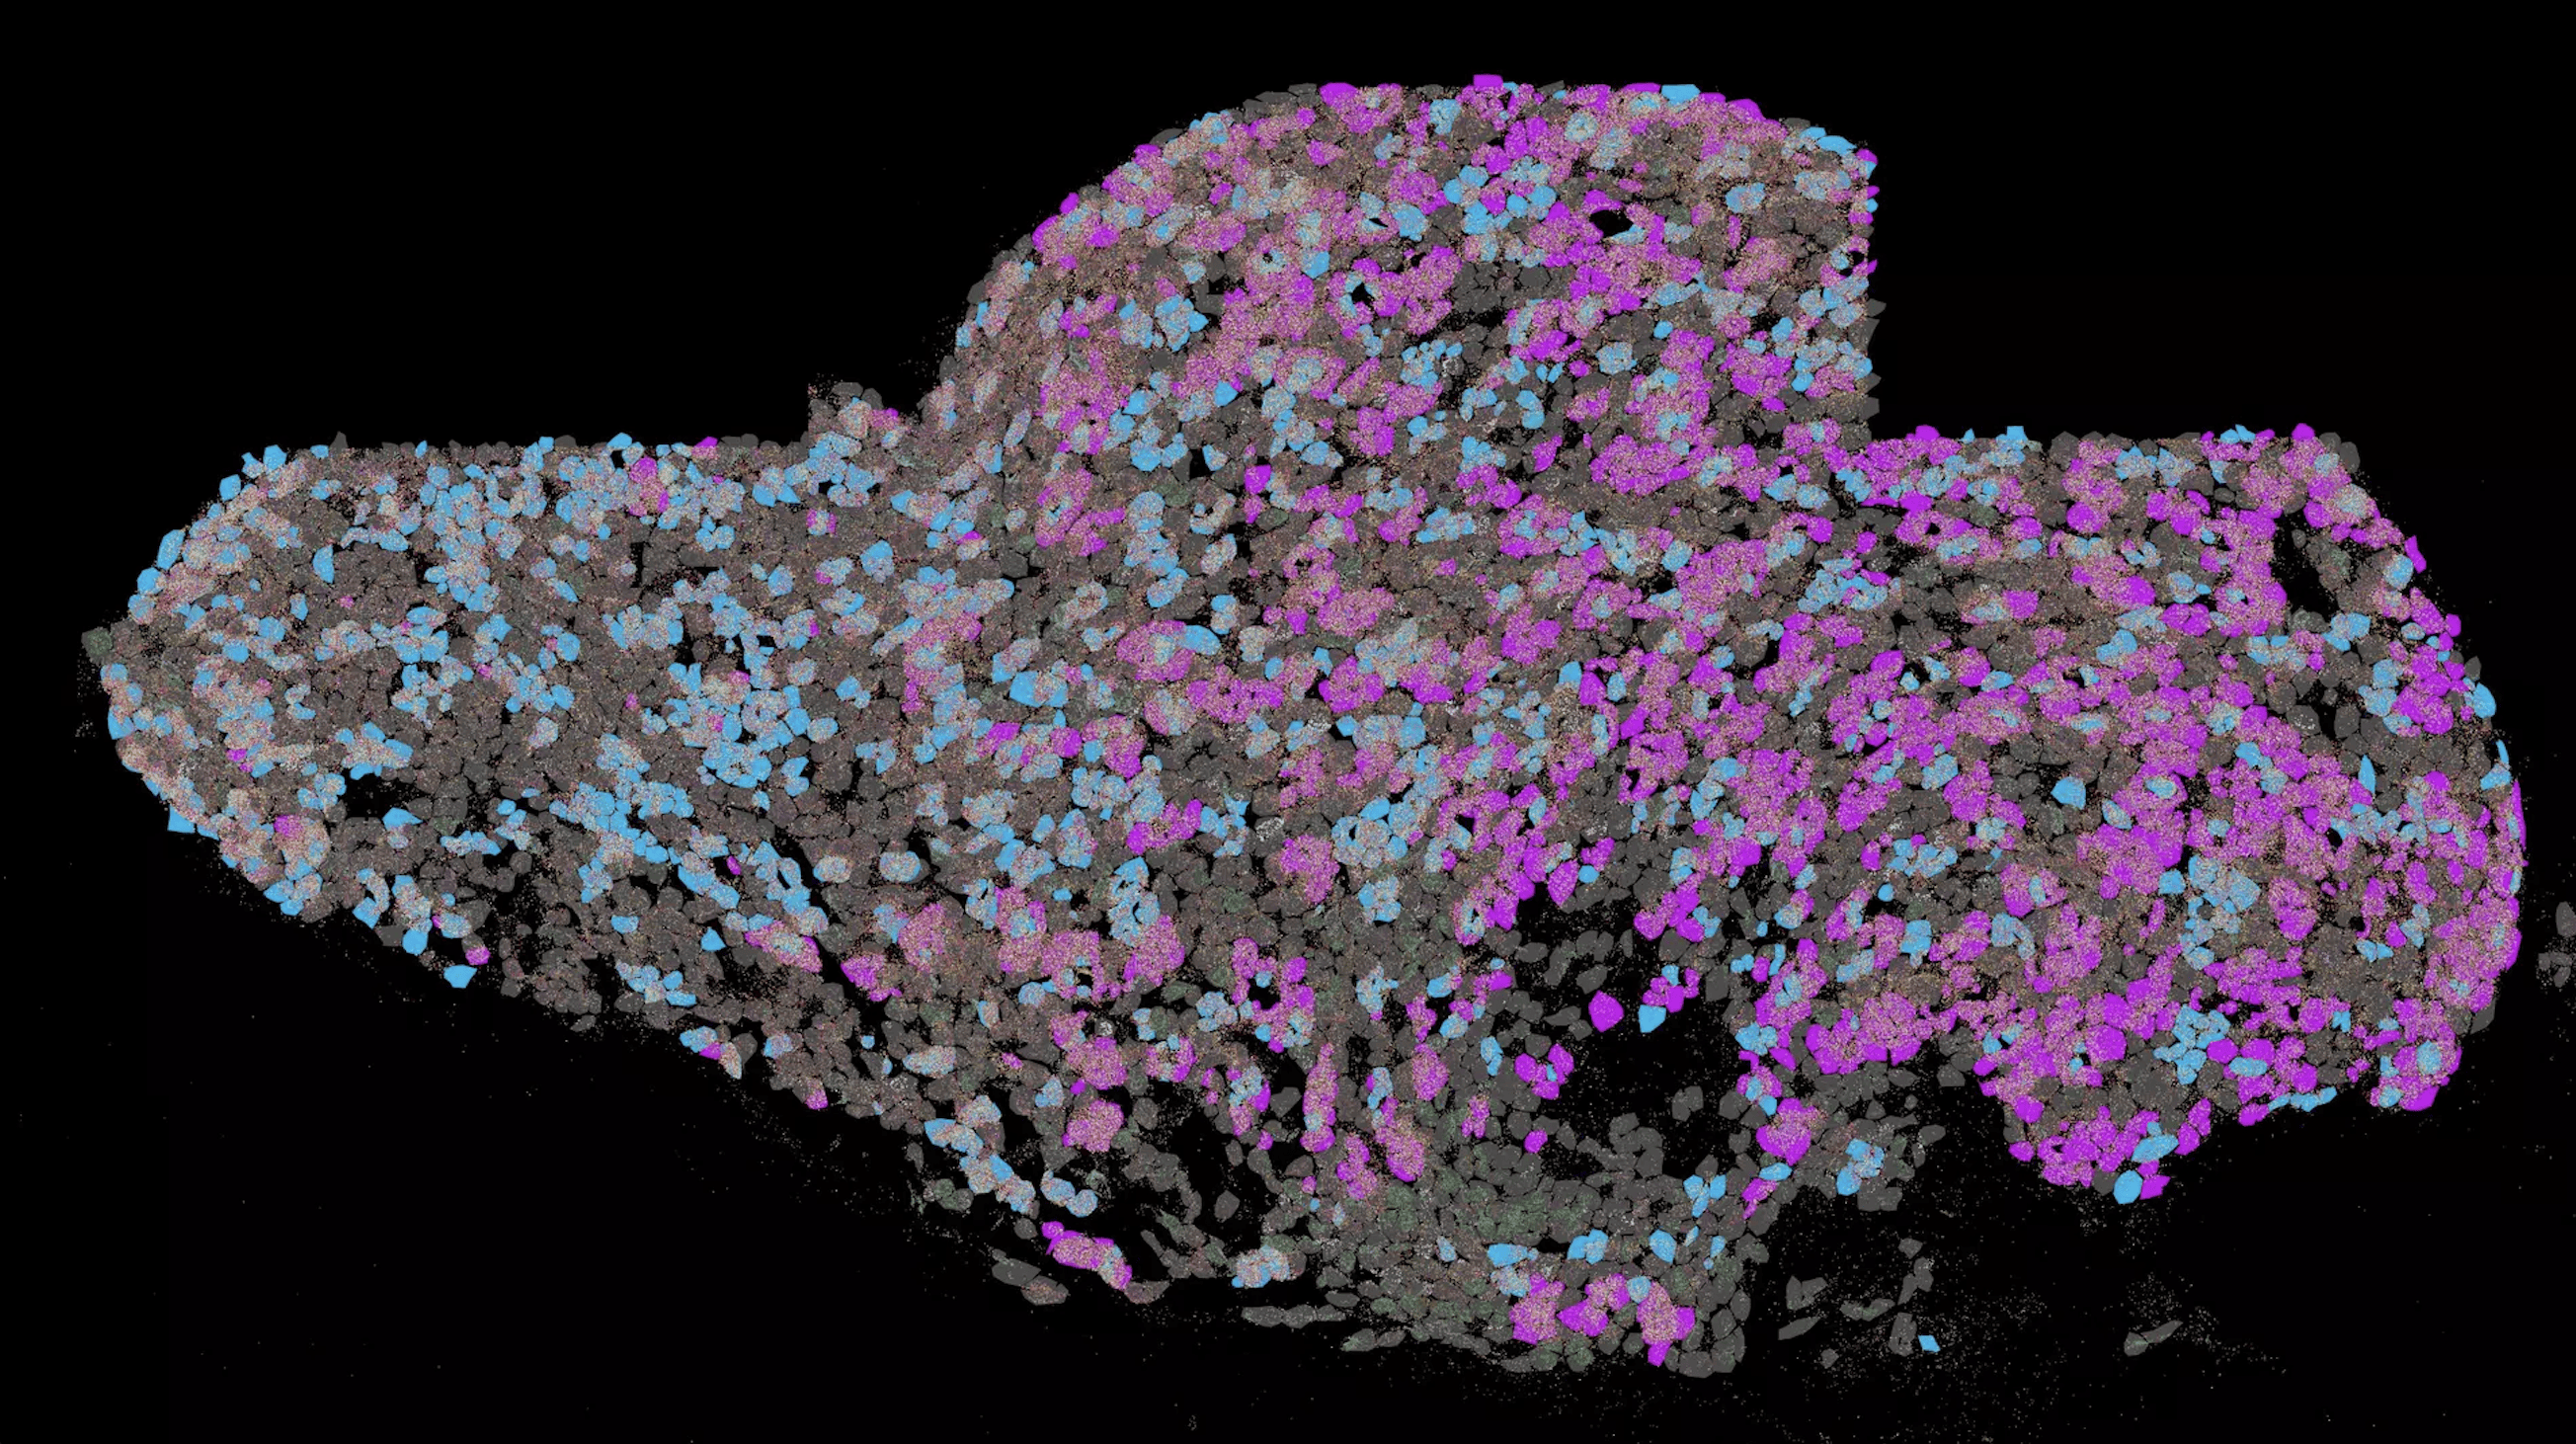 The superior cervical ganglion of a mouse: Here, neurons that control the heart muscle (pink) are in close proximity to those that control the pineal gland (blue).